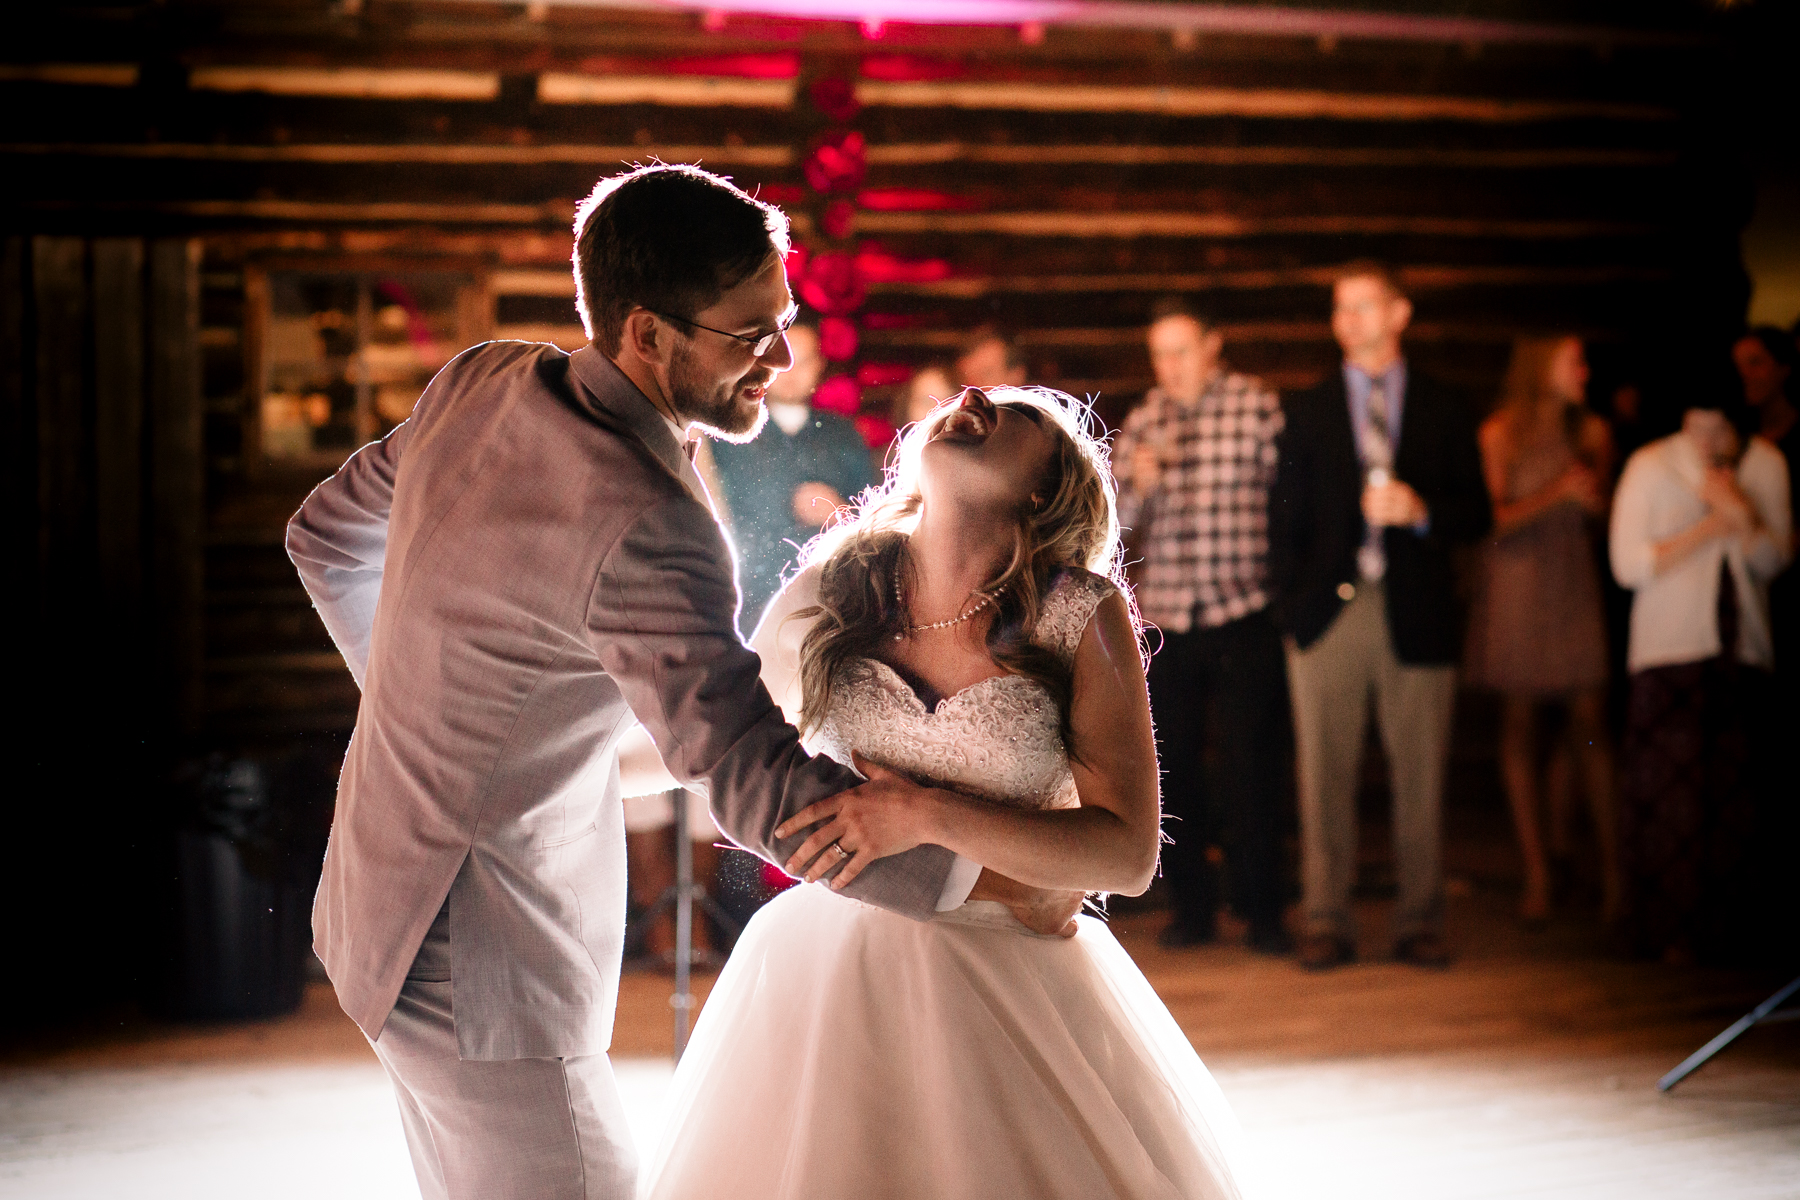 wedding photography styles Candid Bride and groom dancing